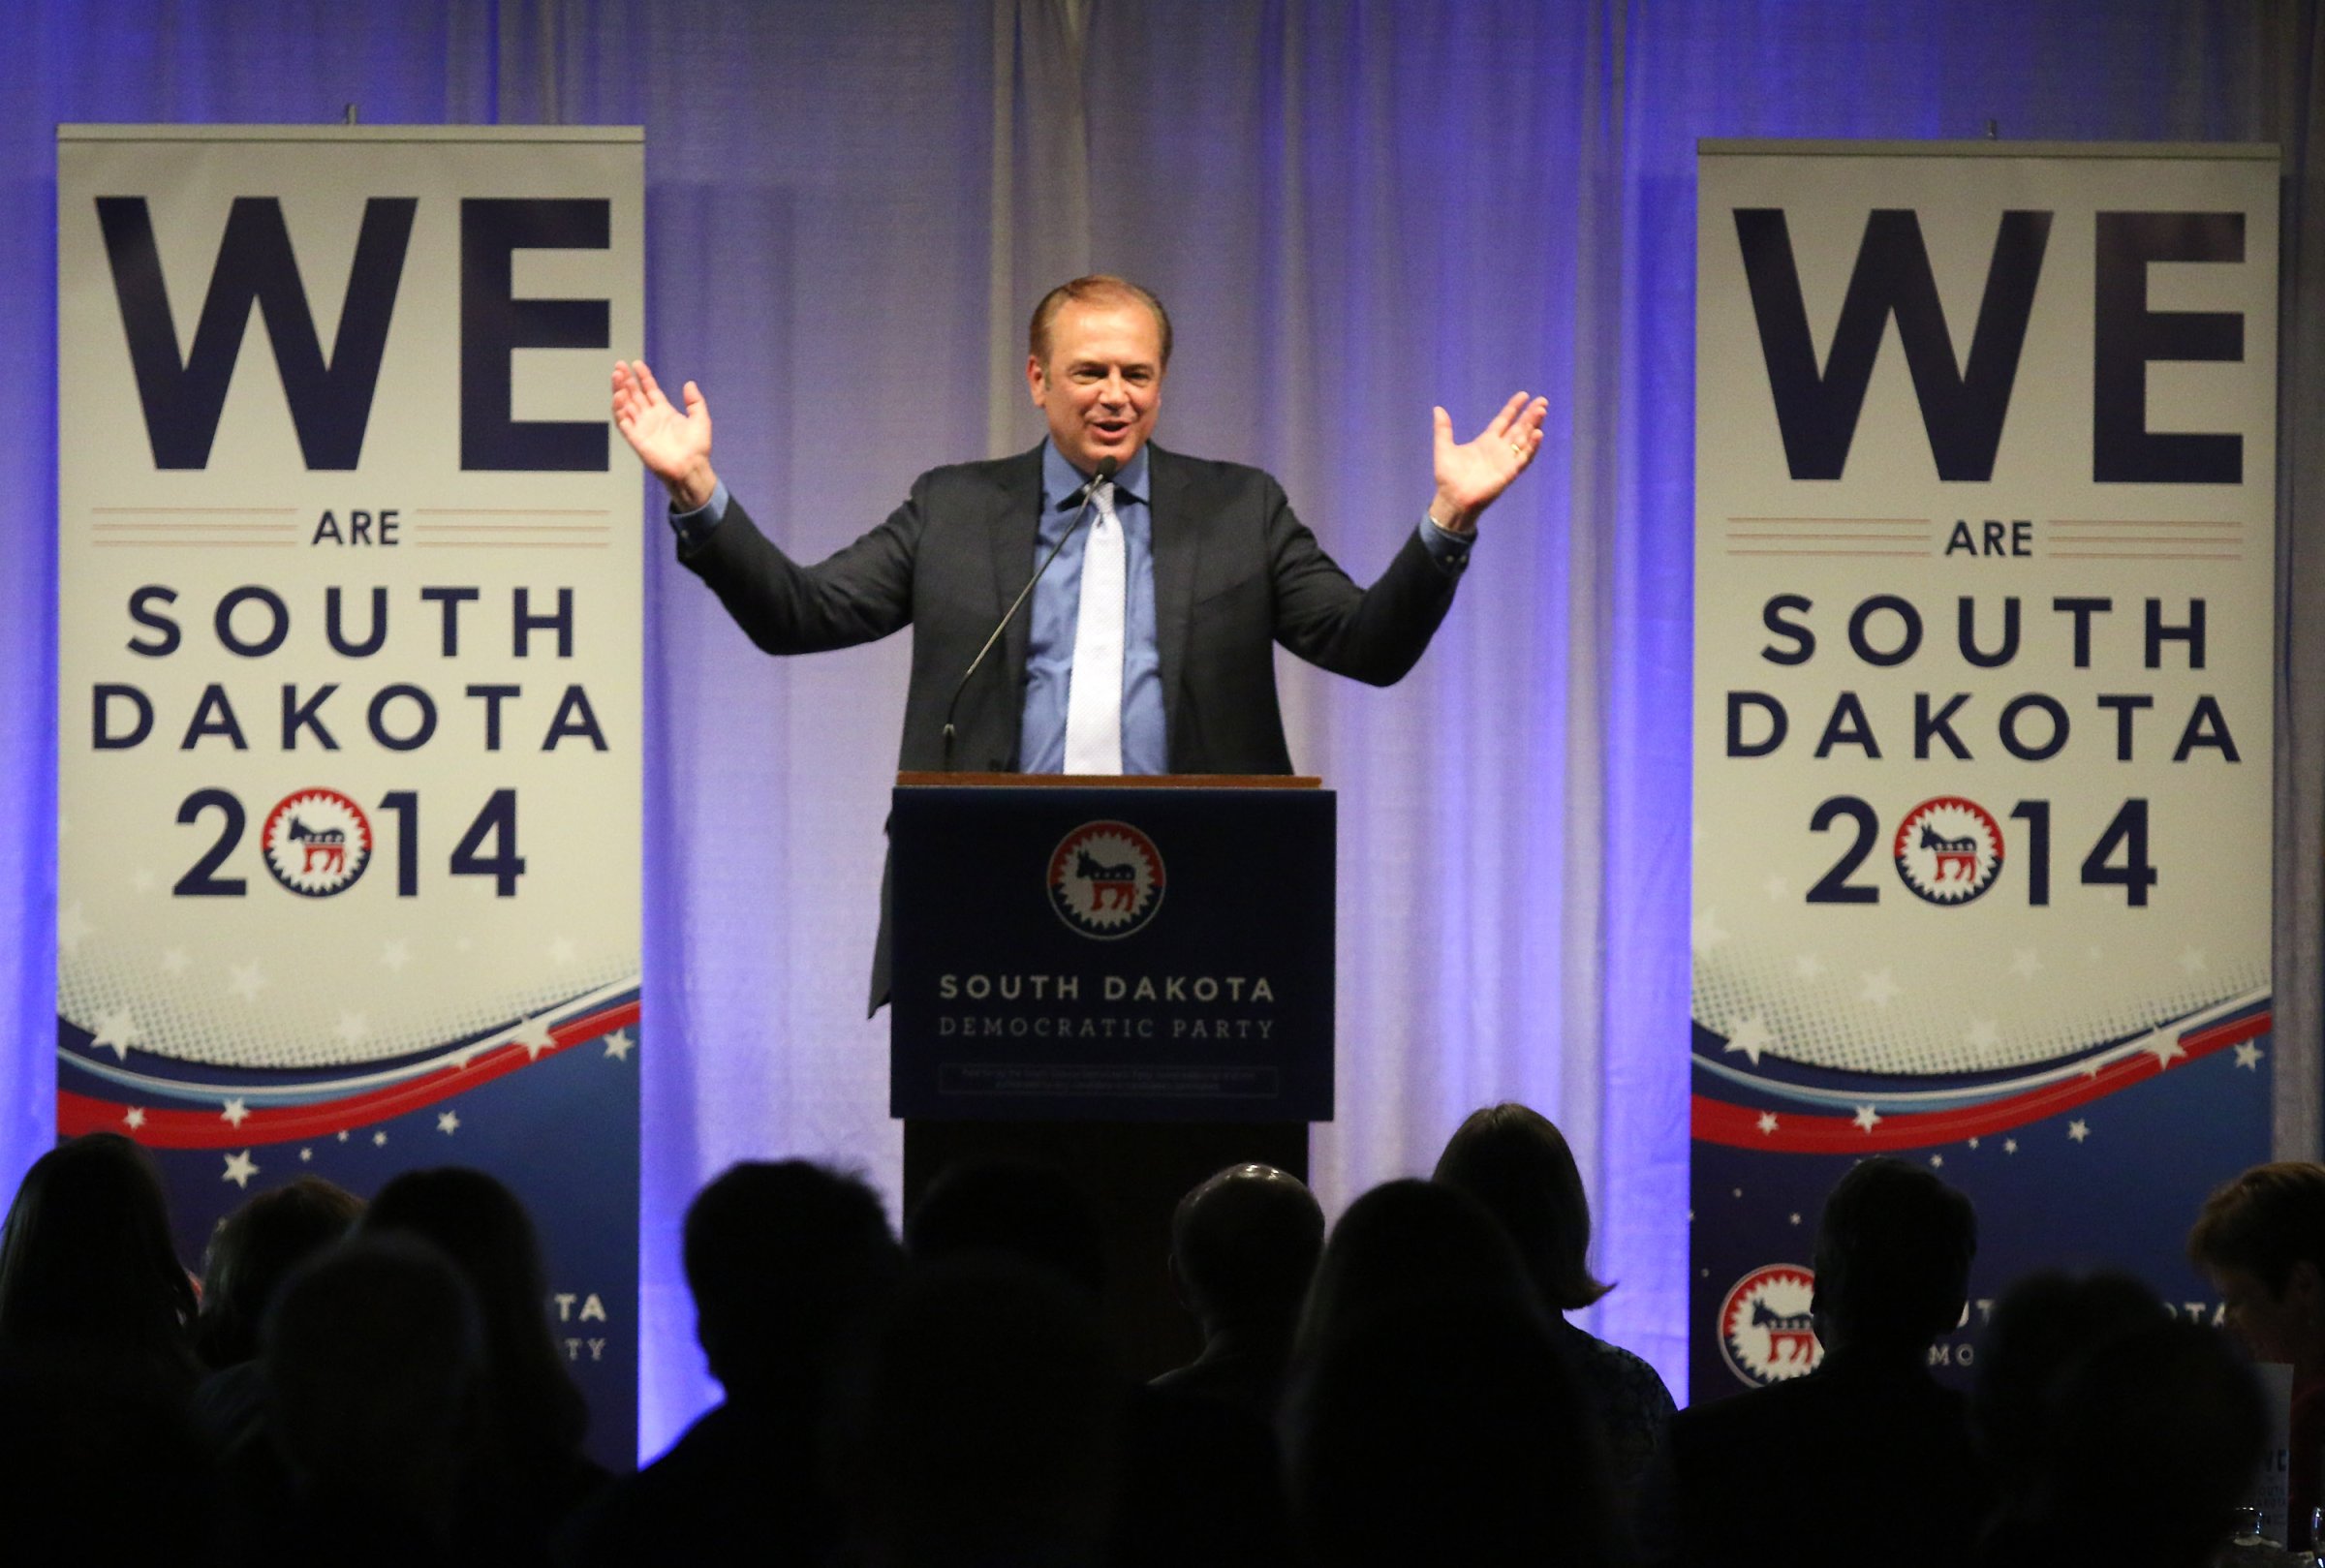 U.S. Senate candidate Rick Weiland speaks at the Democratic Convention on June 27, 2014 in Yankton, S.D.